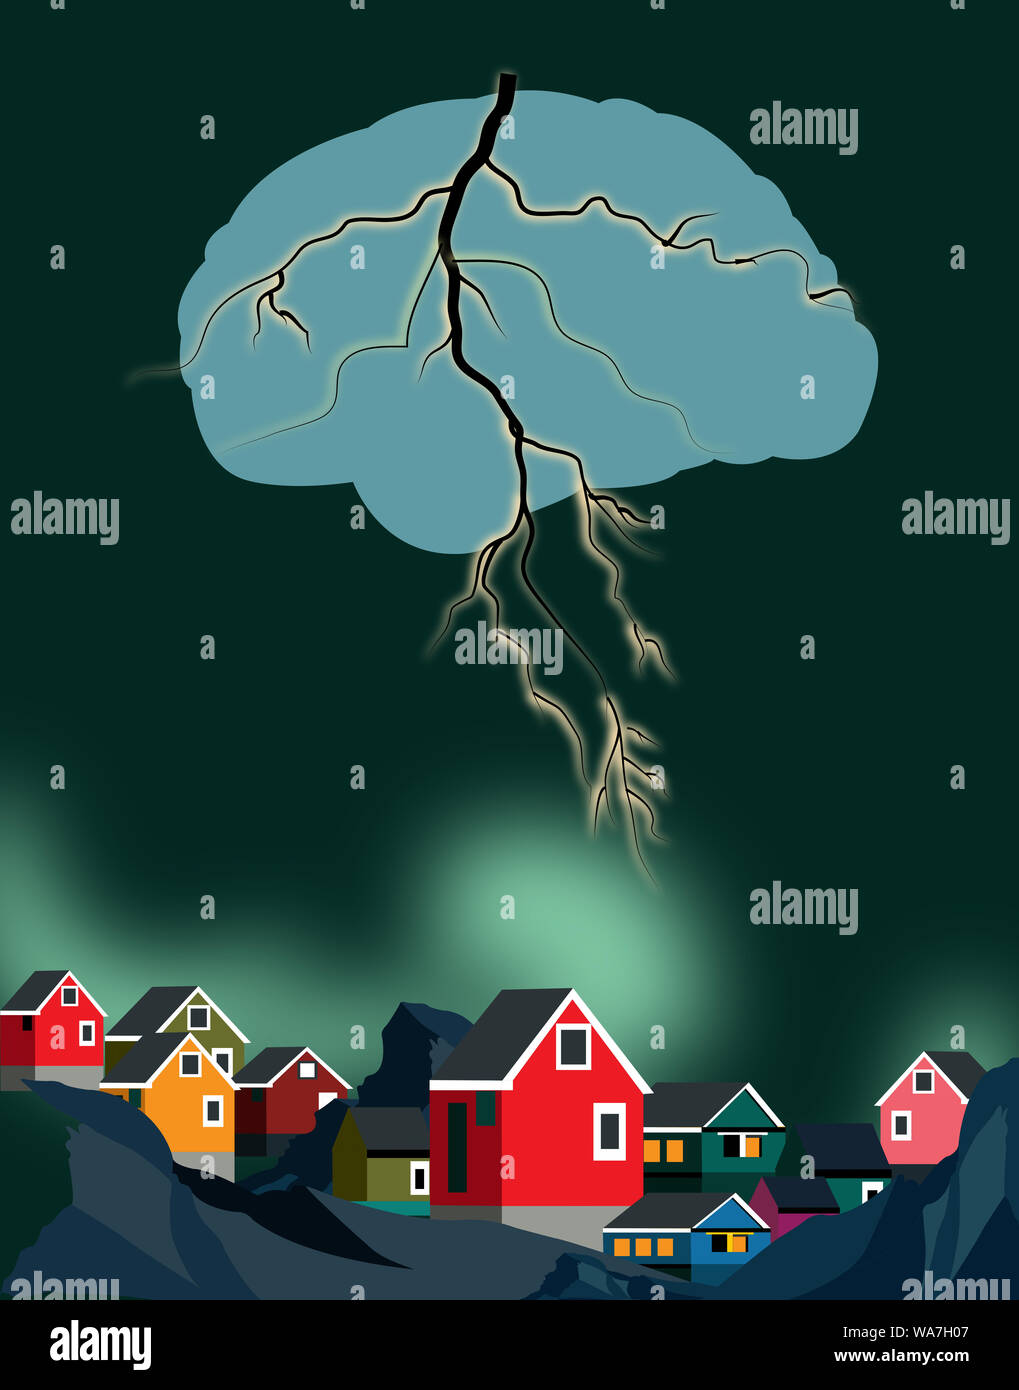 illustration of a brain in form of a lightning striking over the houses Stock Photo